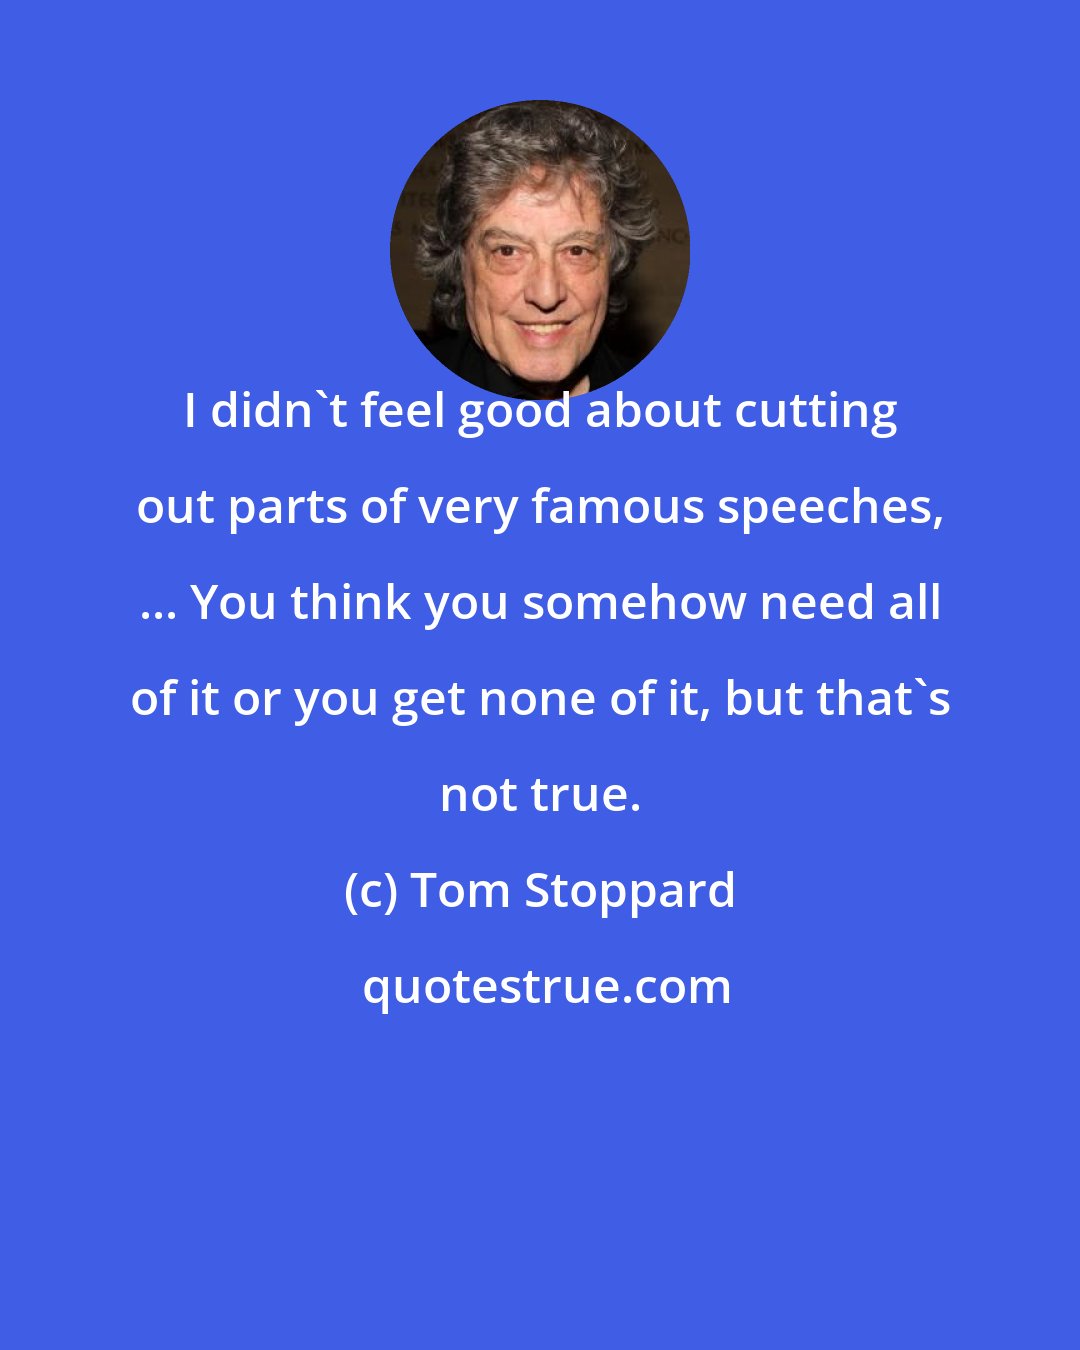 Tom Stoppard: I didn't feel good about cutting out parts of very famous speeches, ... You think you somehow need all of it or you get none of it, but that's not true.